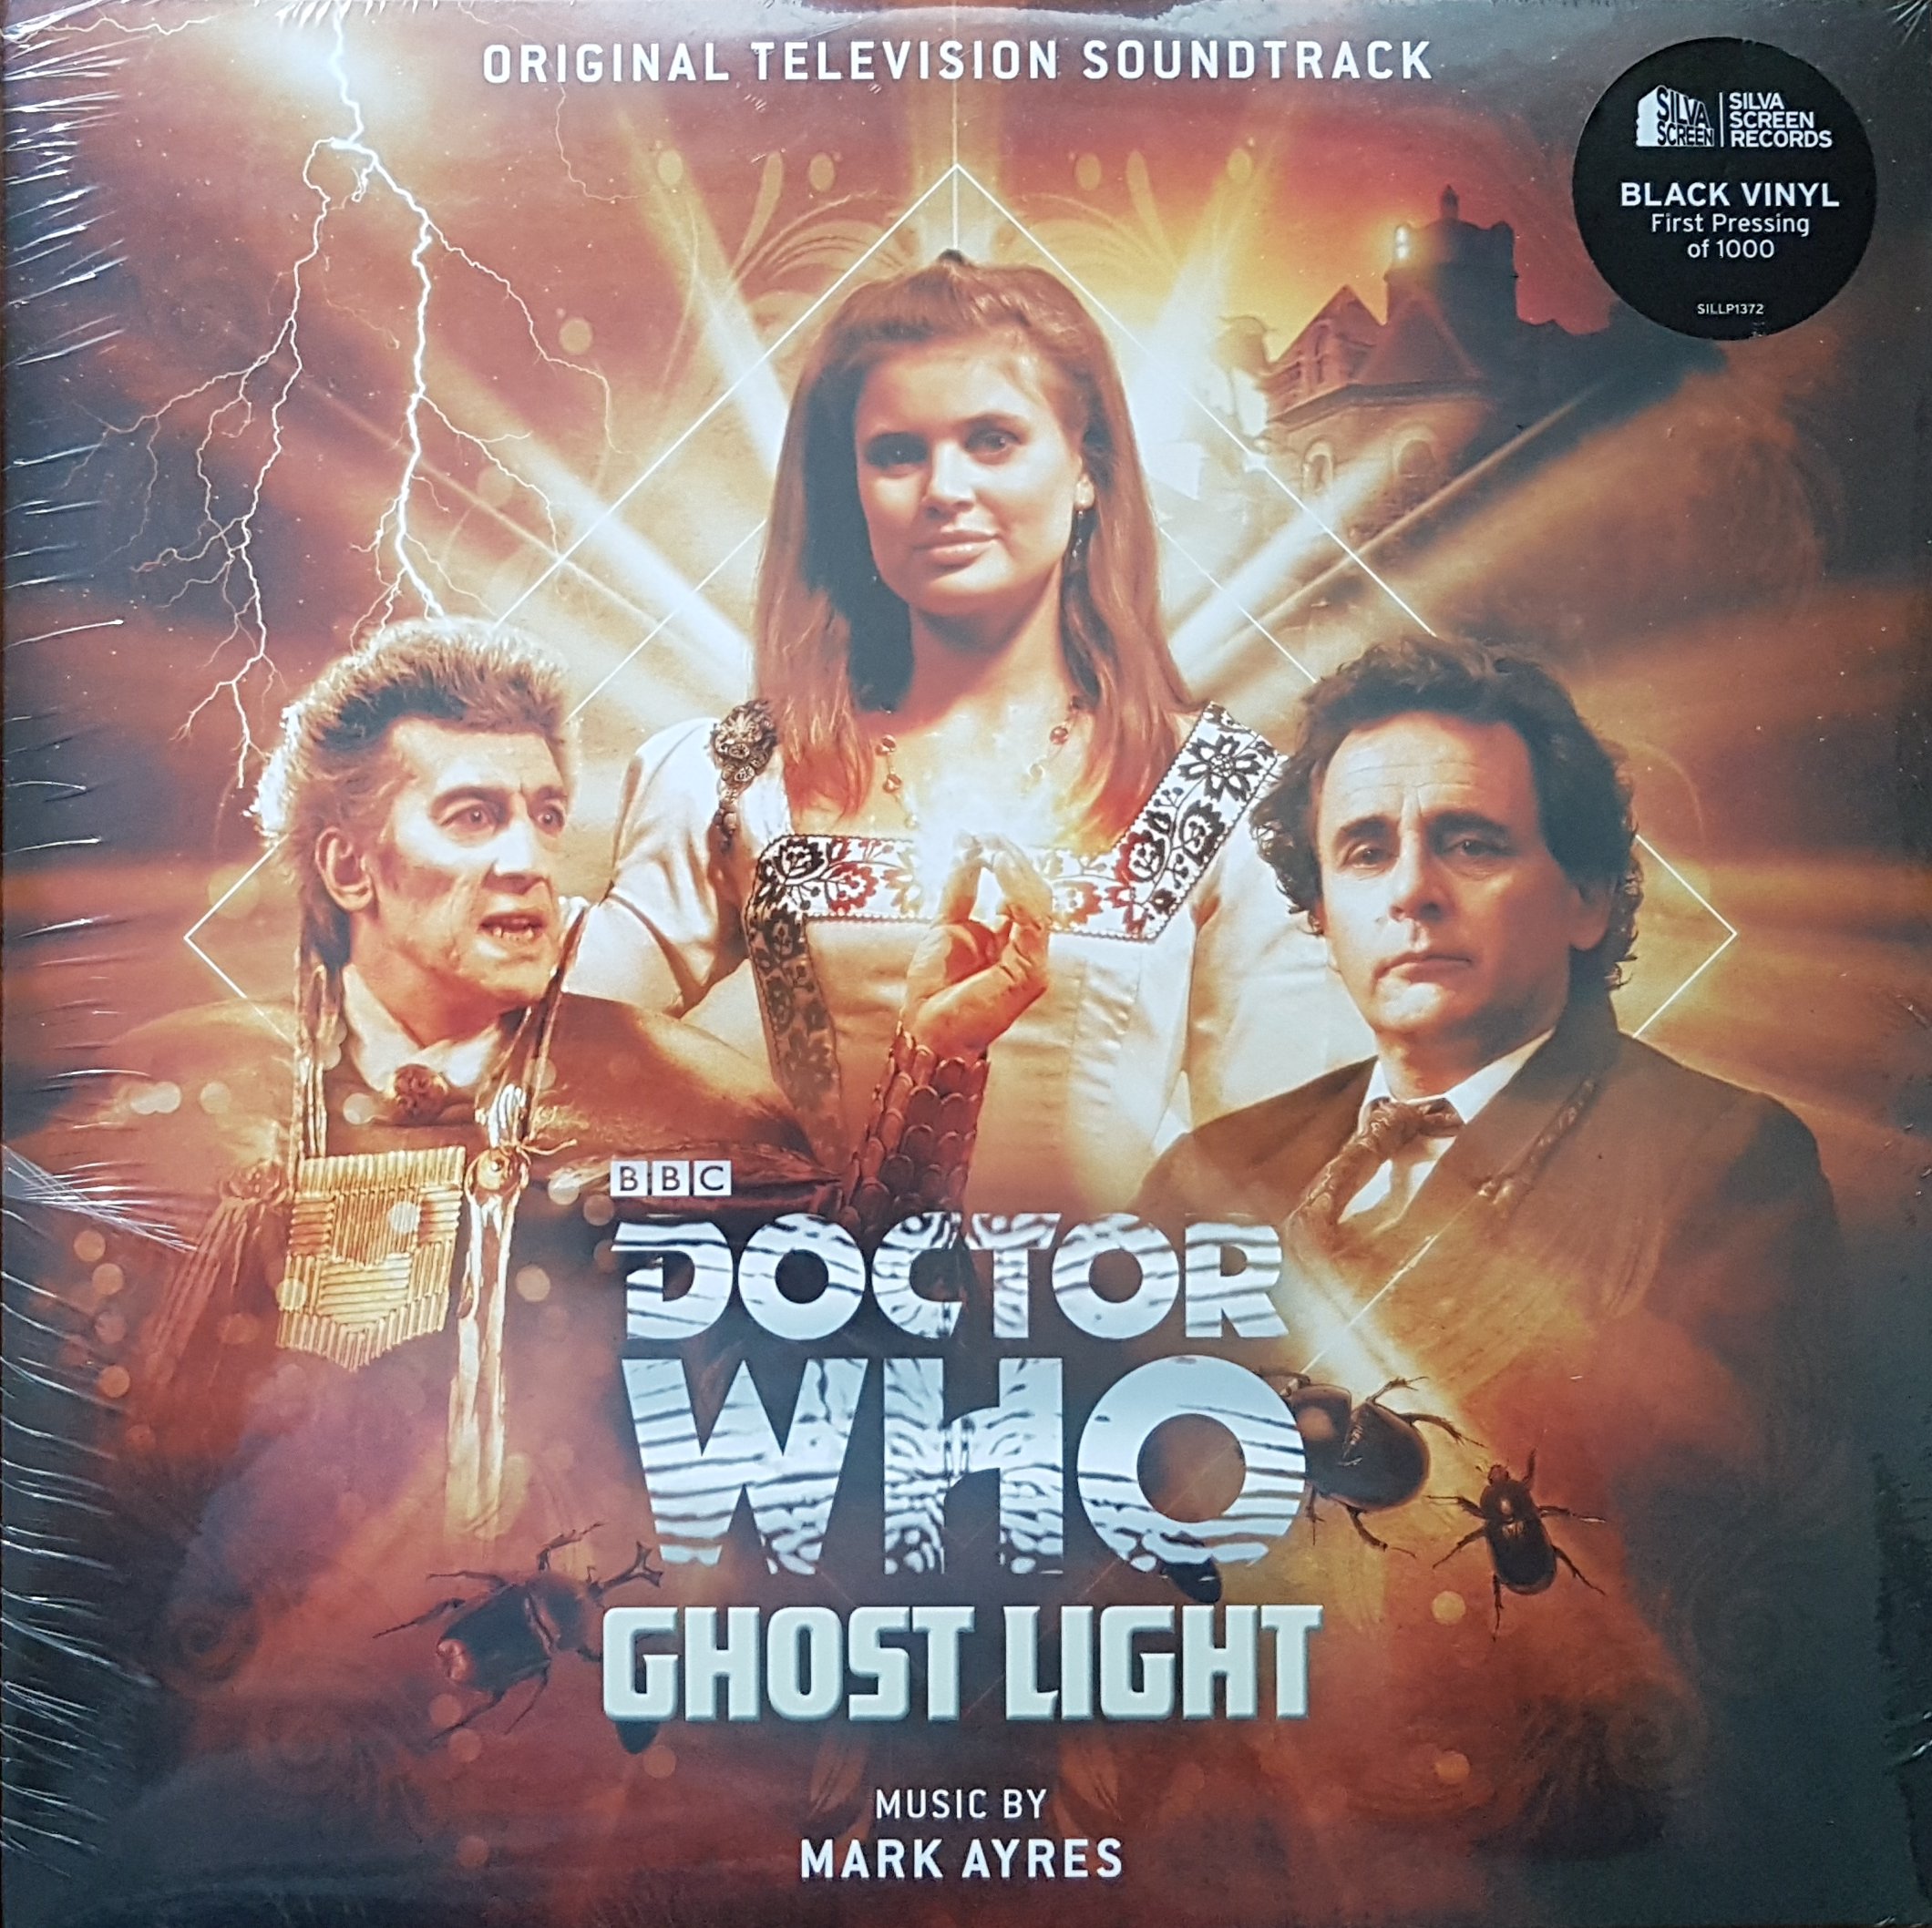 Picture of SILLP 1372 Doctor Who - Ghost light by artist Mark Ayres from the BBC records and Tapes library